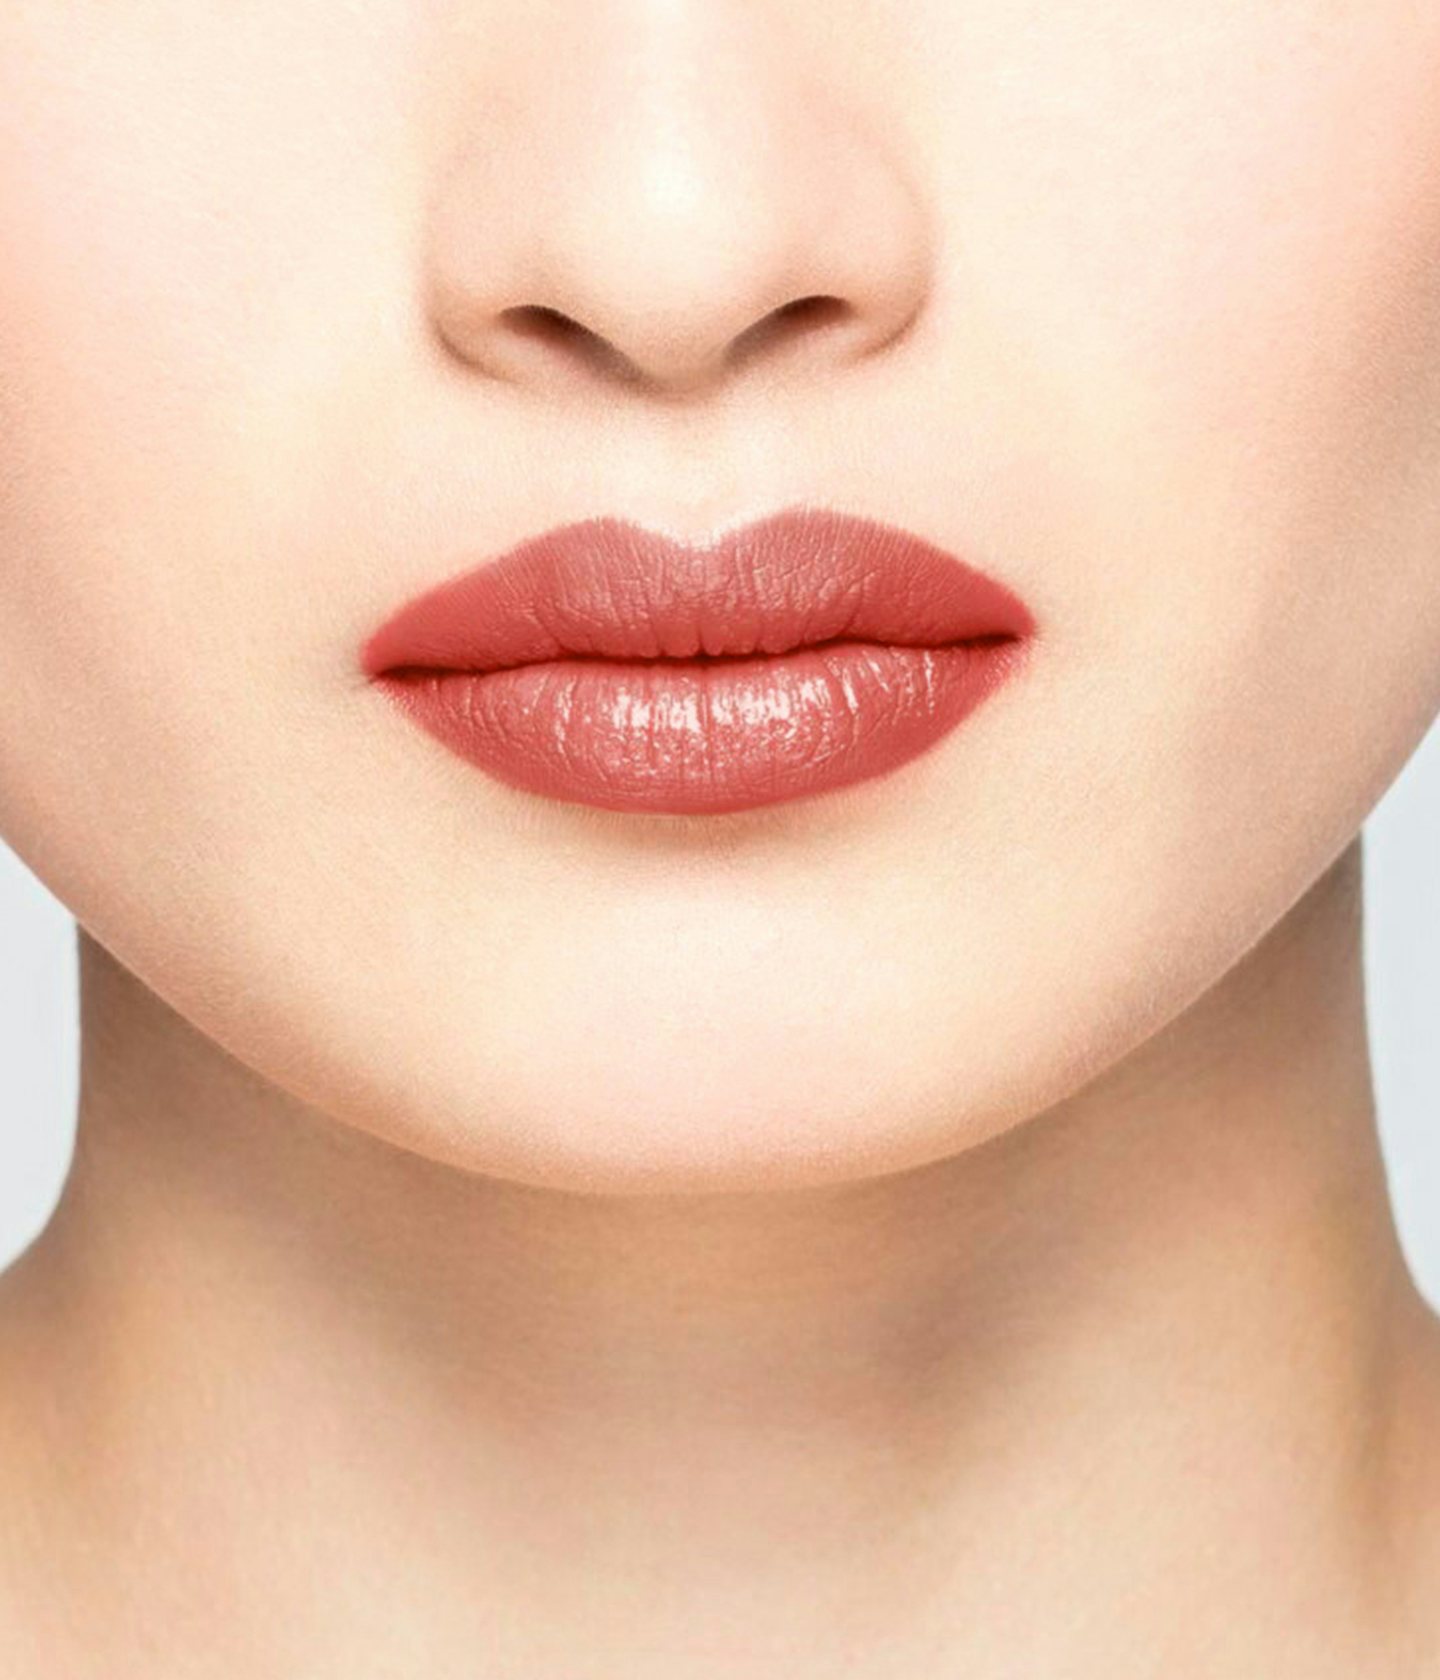 La bouche rouge Red balm lipstick shade on the lips of an Asian model